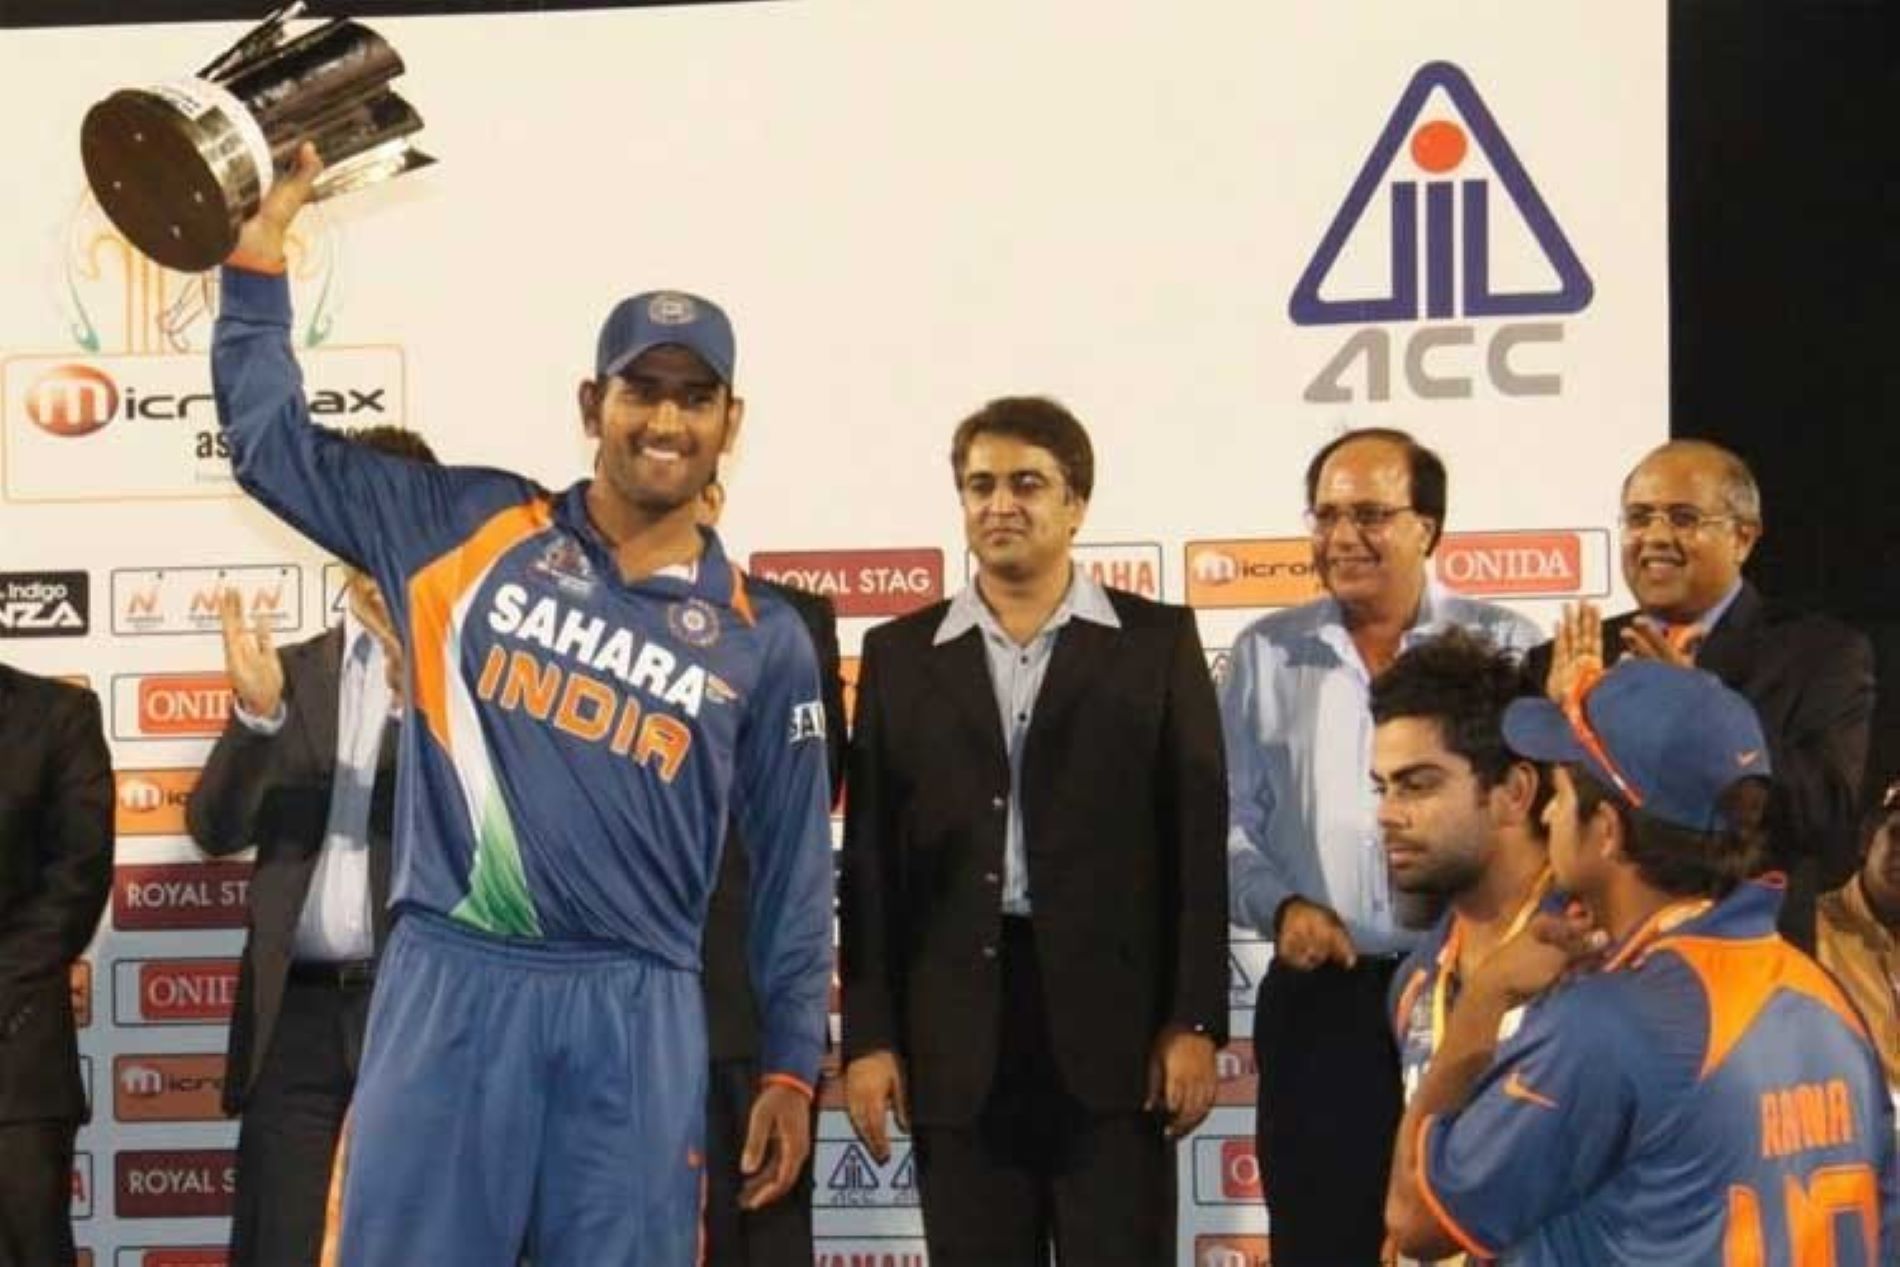 MS Dhoni led India to their 5th Asia Cup title in 2010